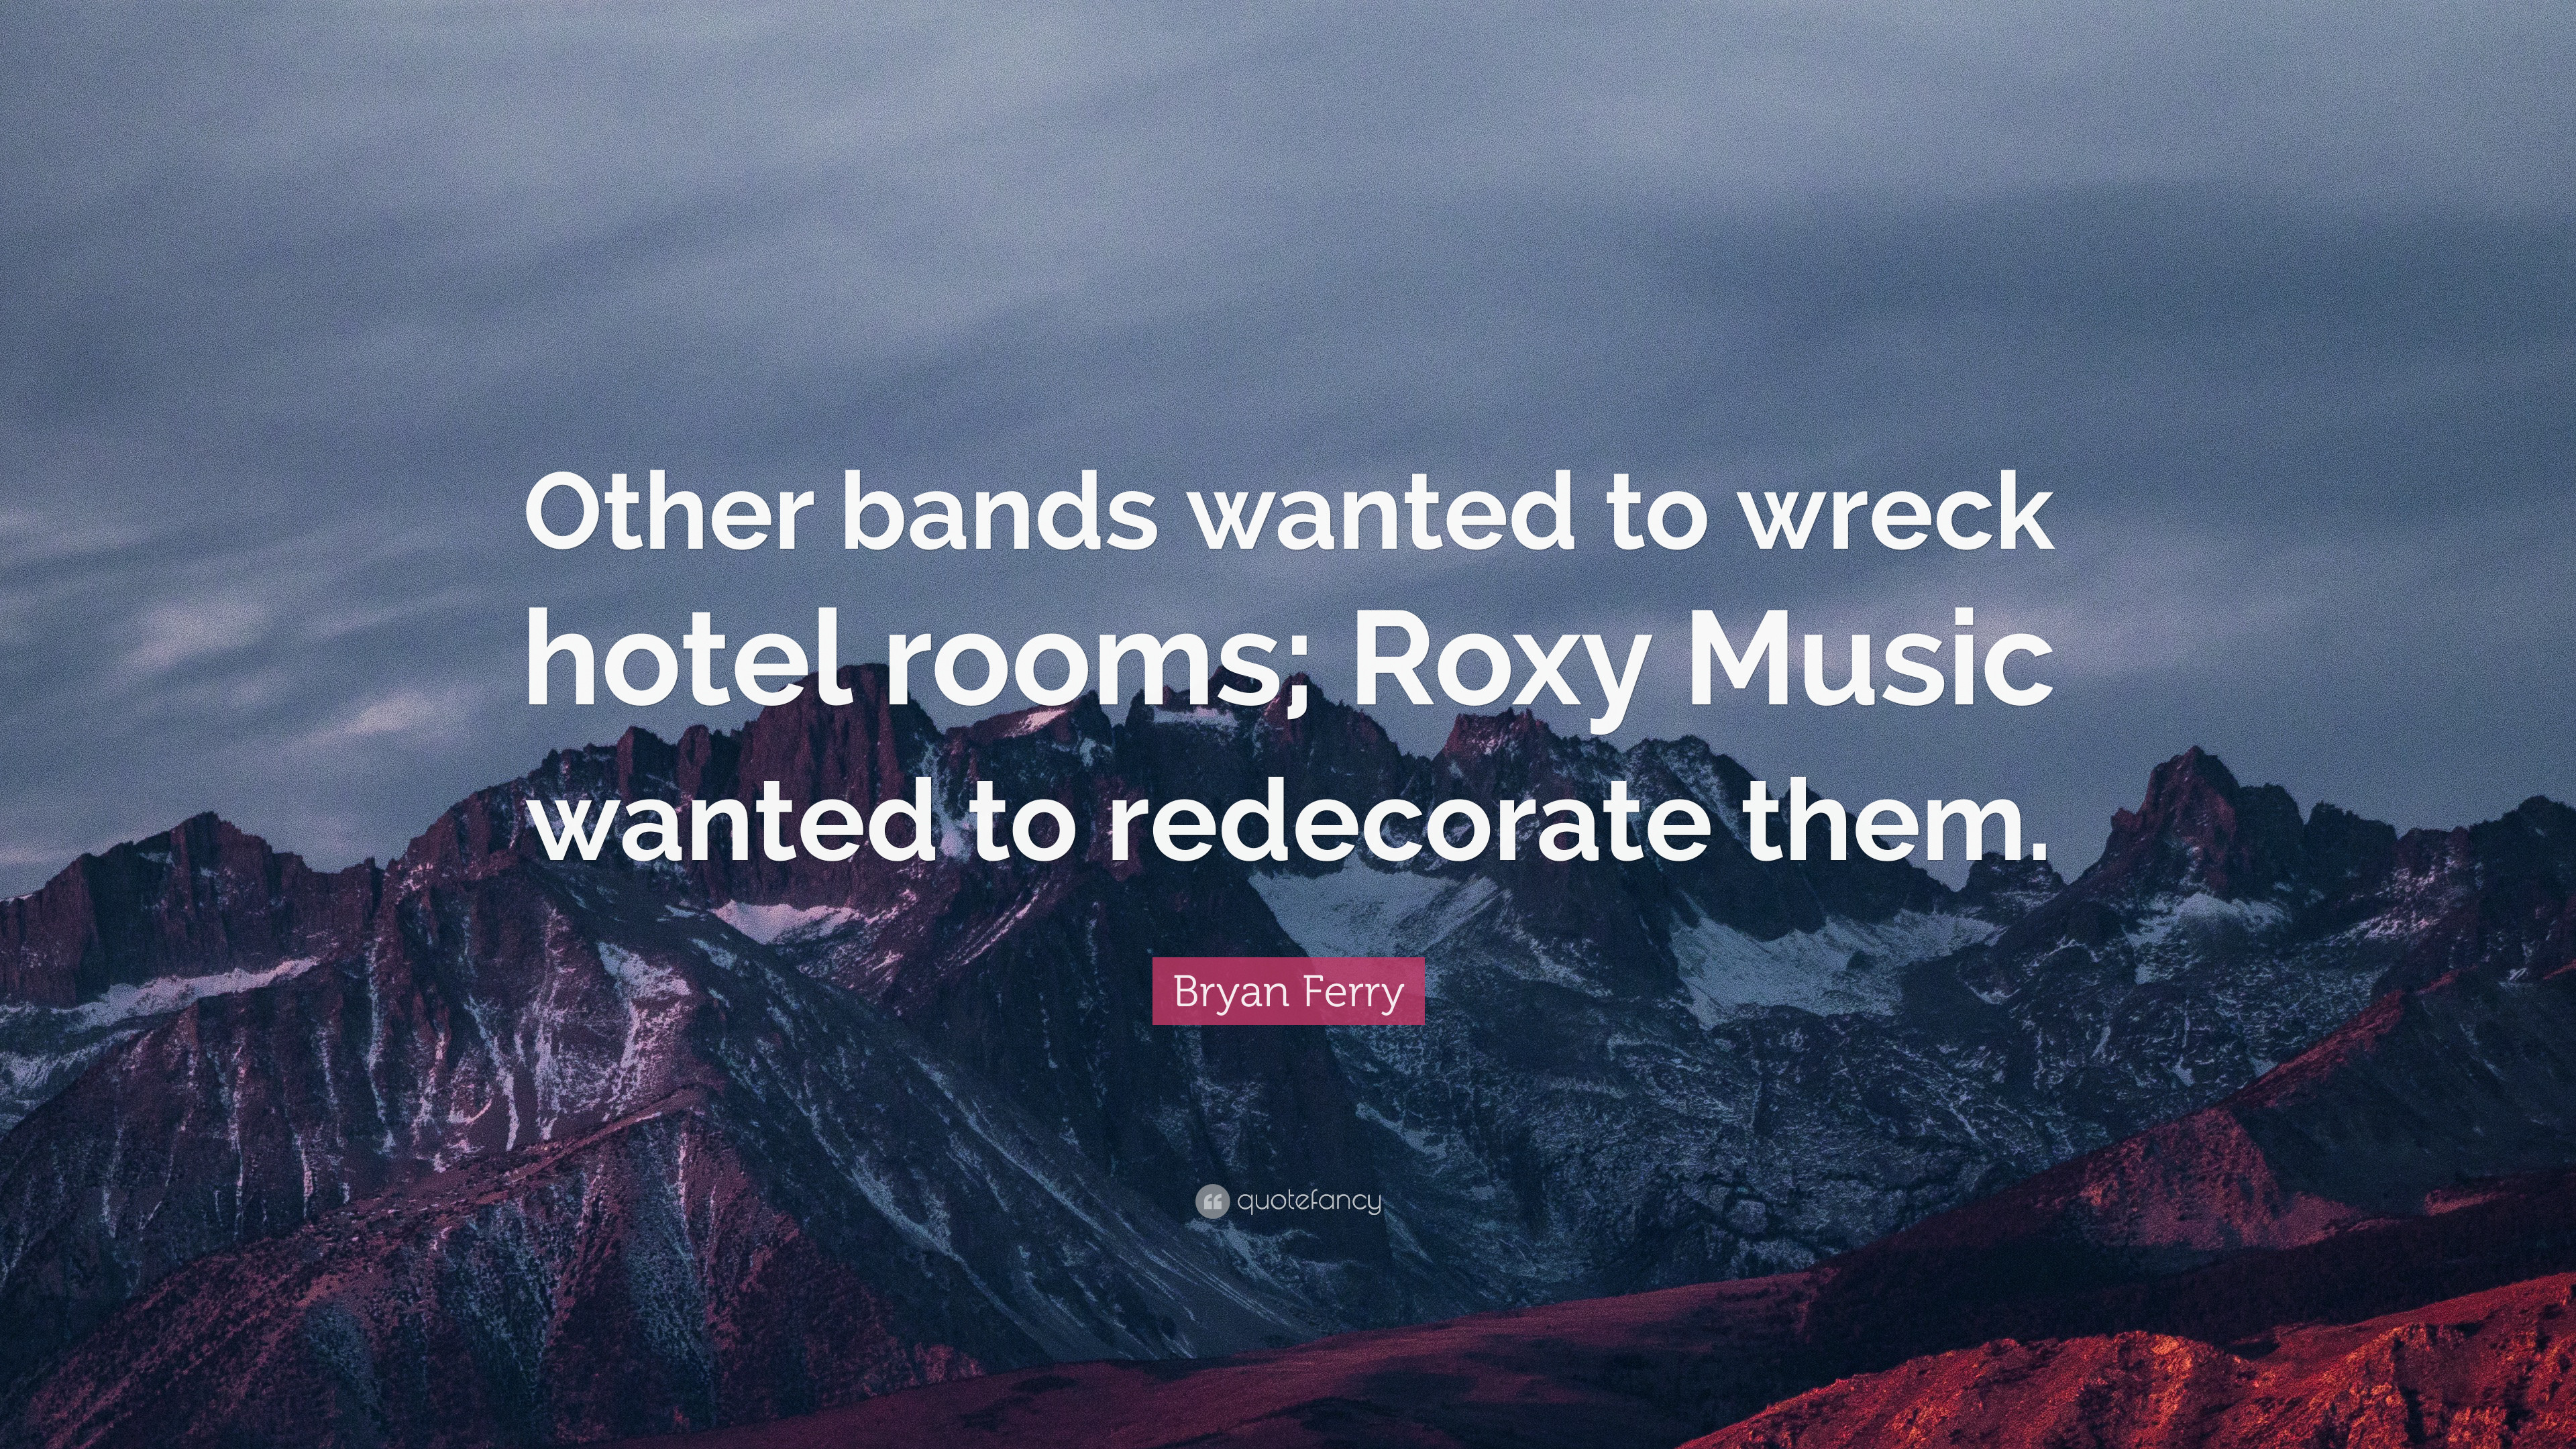 3840x2160 Bryan Ferry Quote: “Other bands wanted to wreck hotel rooms; Roxy Music  wanted